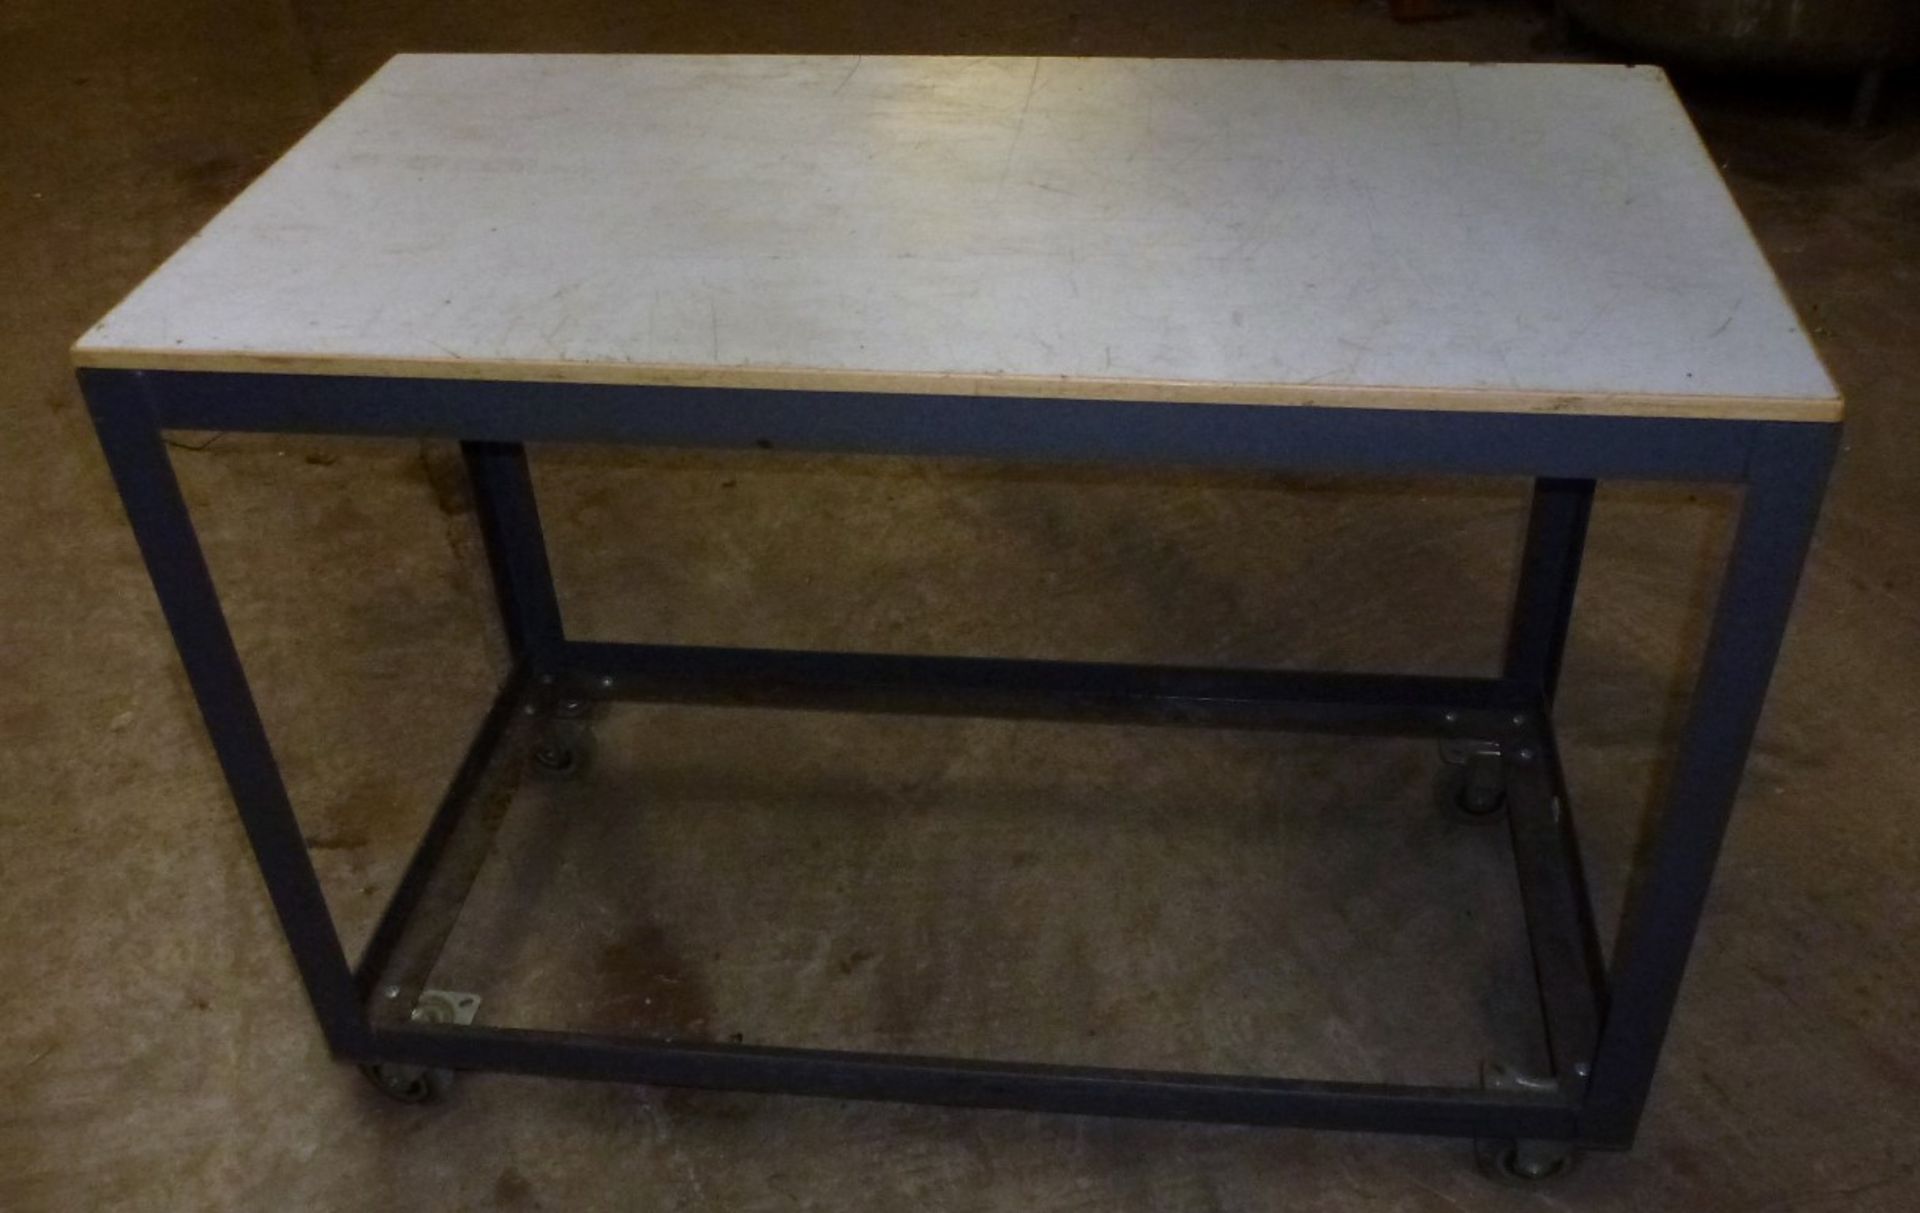 1 x Mobile Work Table - Large Size With Undershelf Bay and Heavy Duty Castor Wheels - Strong Build - Image 2 of 2